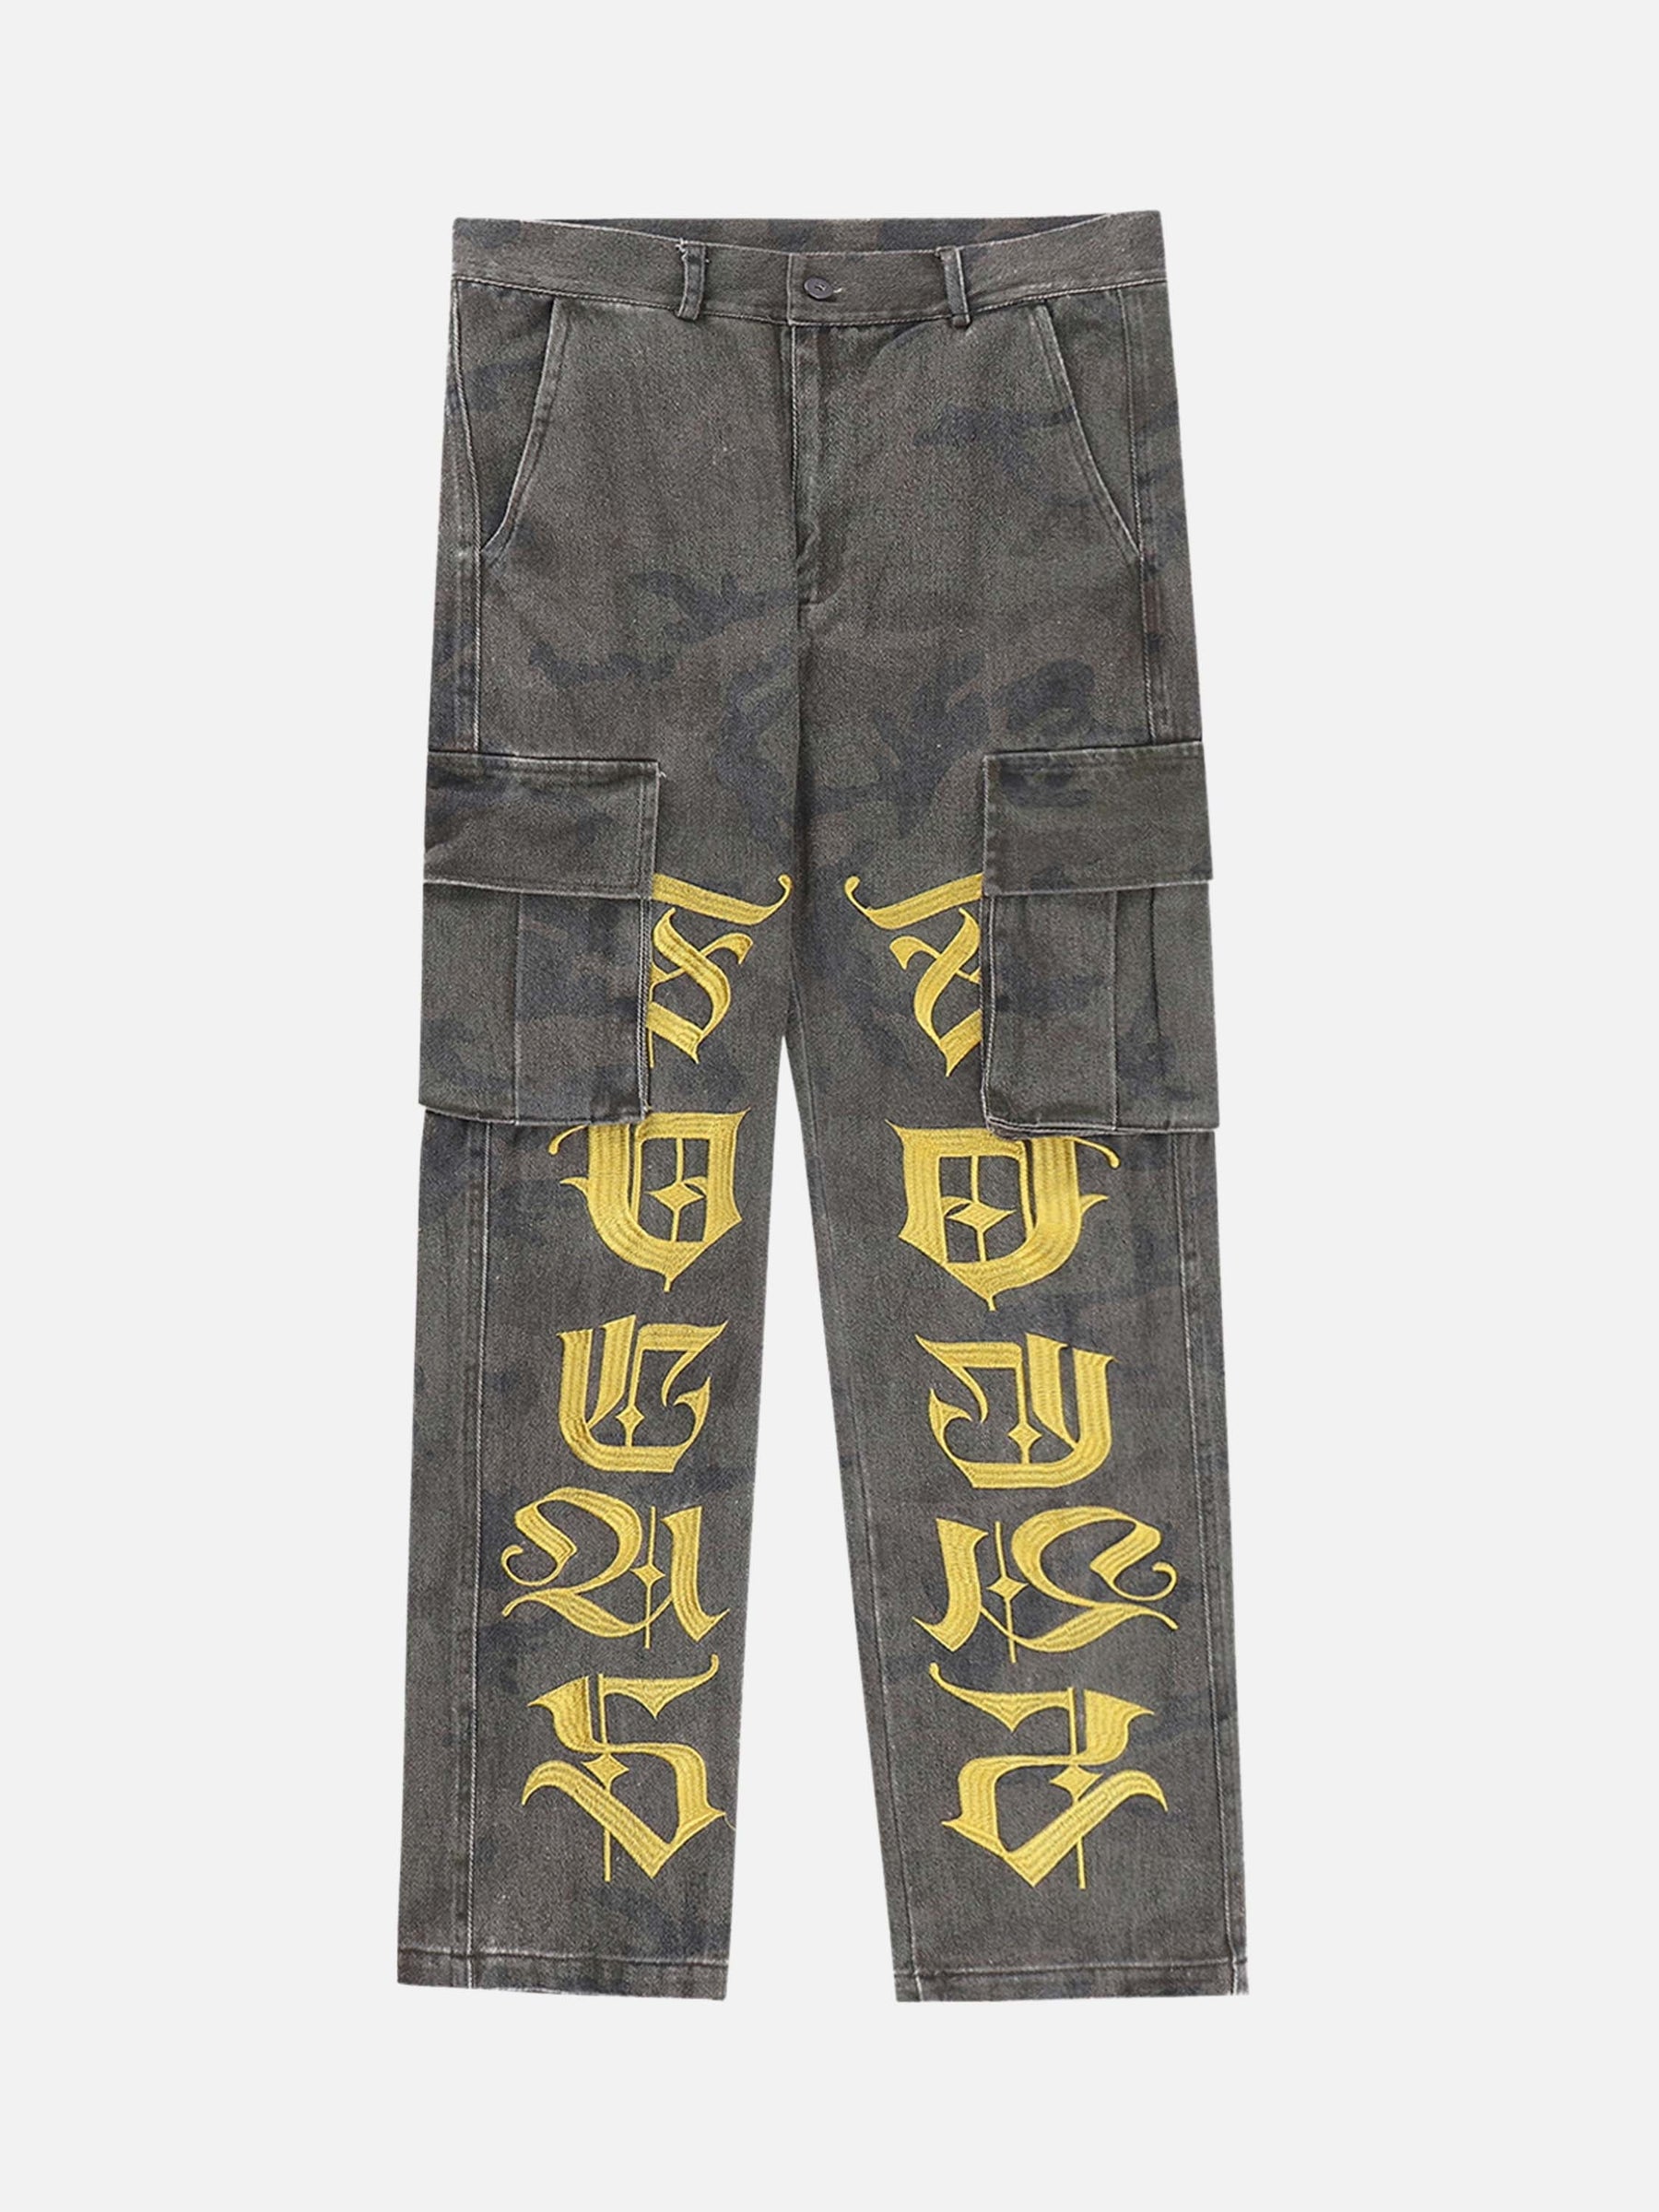 LUXENFY™ - Hip-hop Vintage Embroidered Straight Work Jeans luxenfy.com